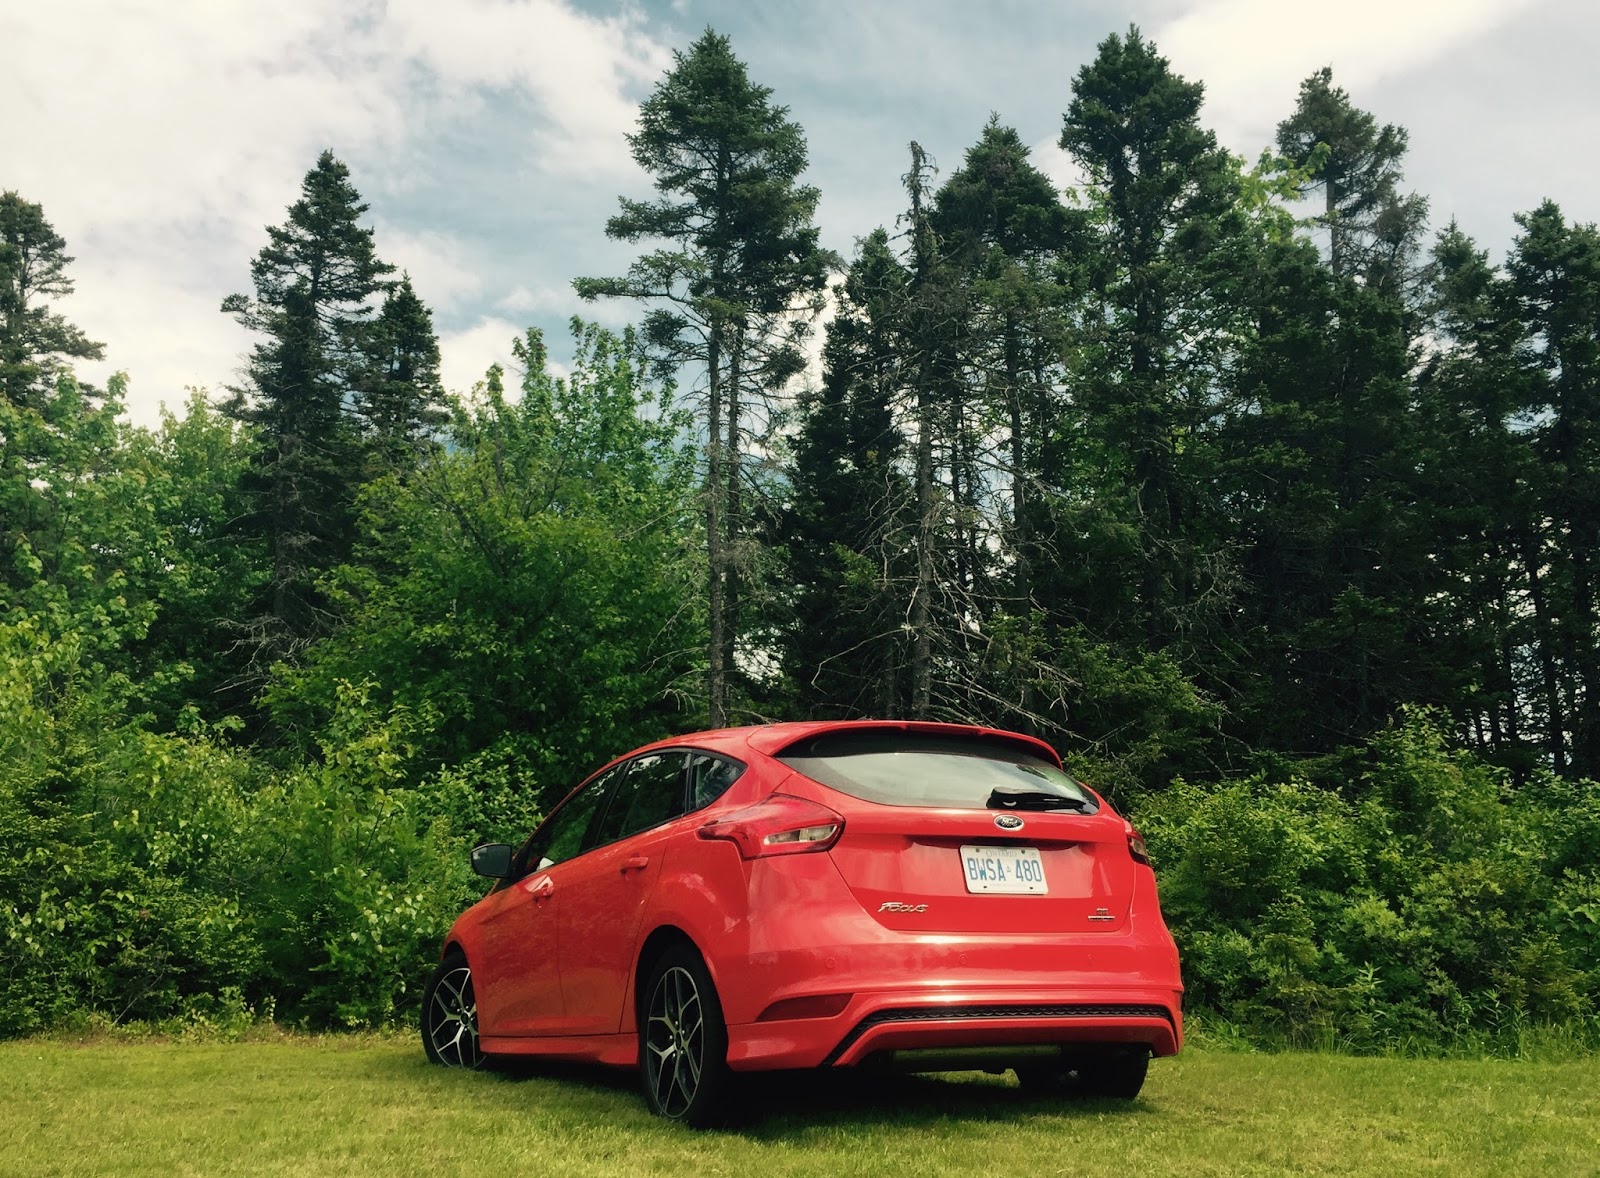 2015 Ford Focus SE Hatchback Review - Charming Chassis Continues To ...